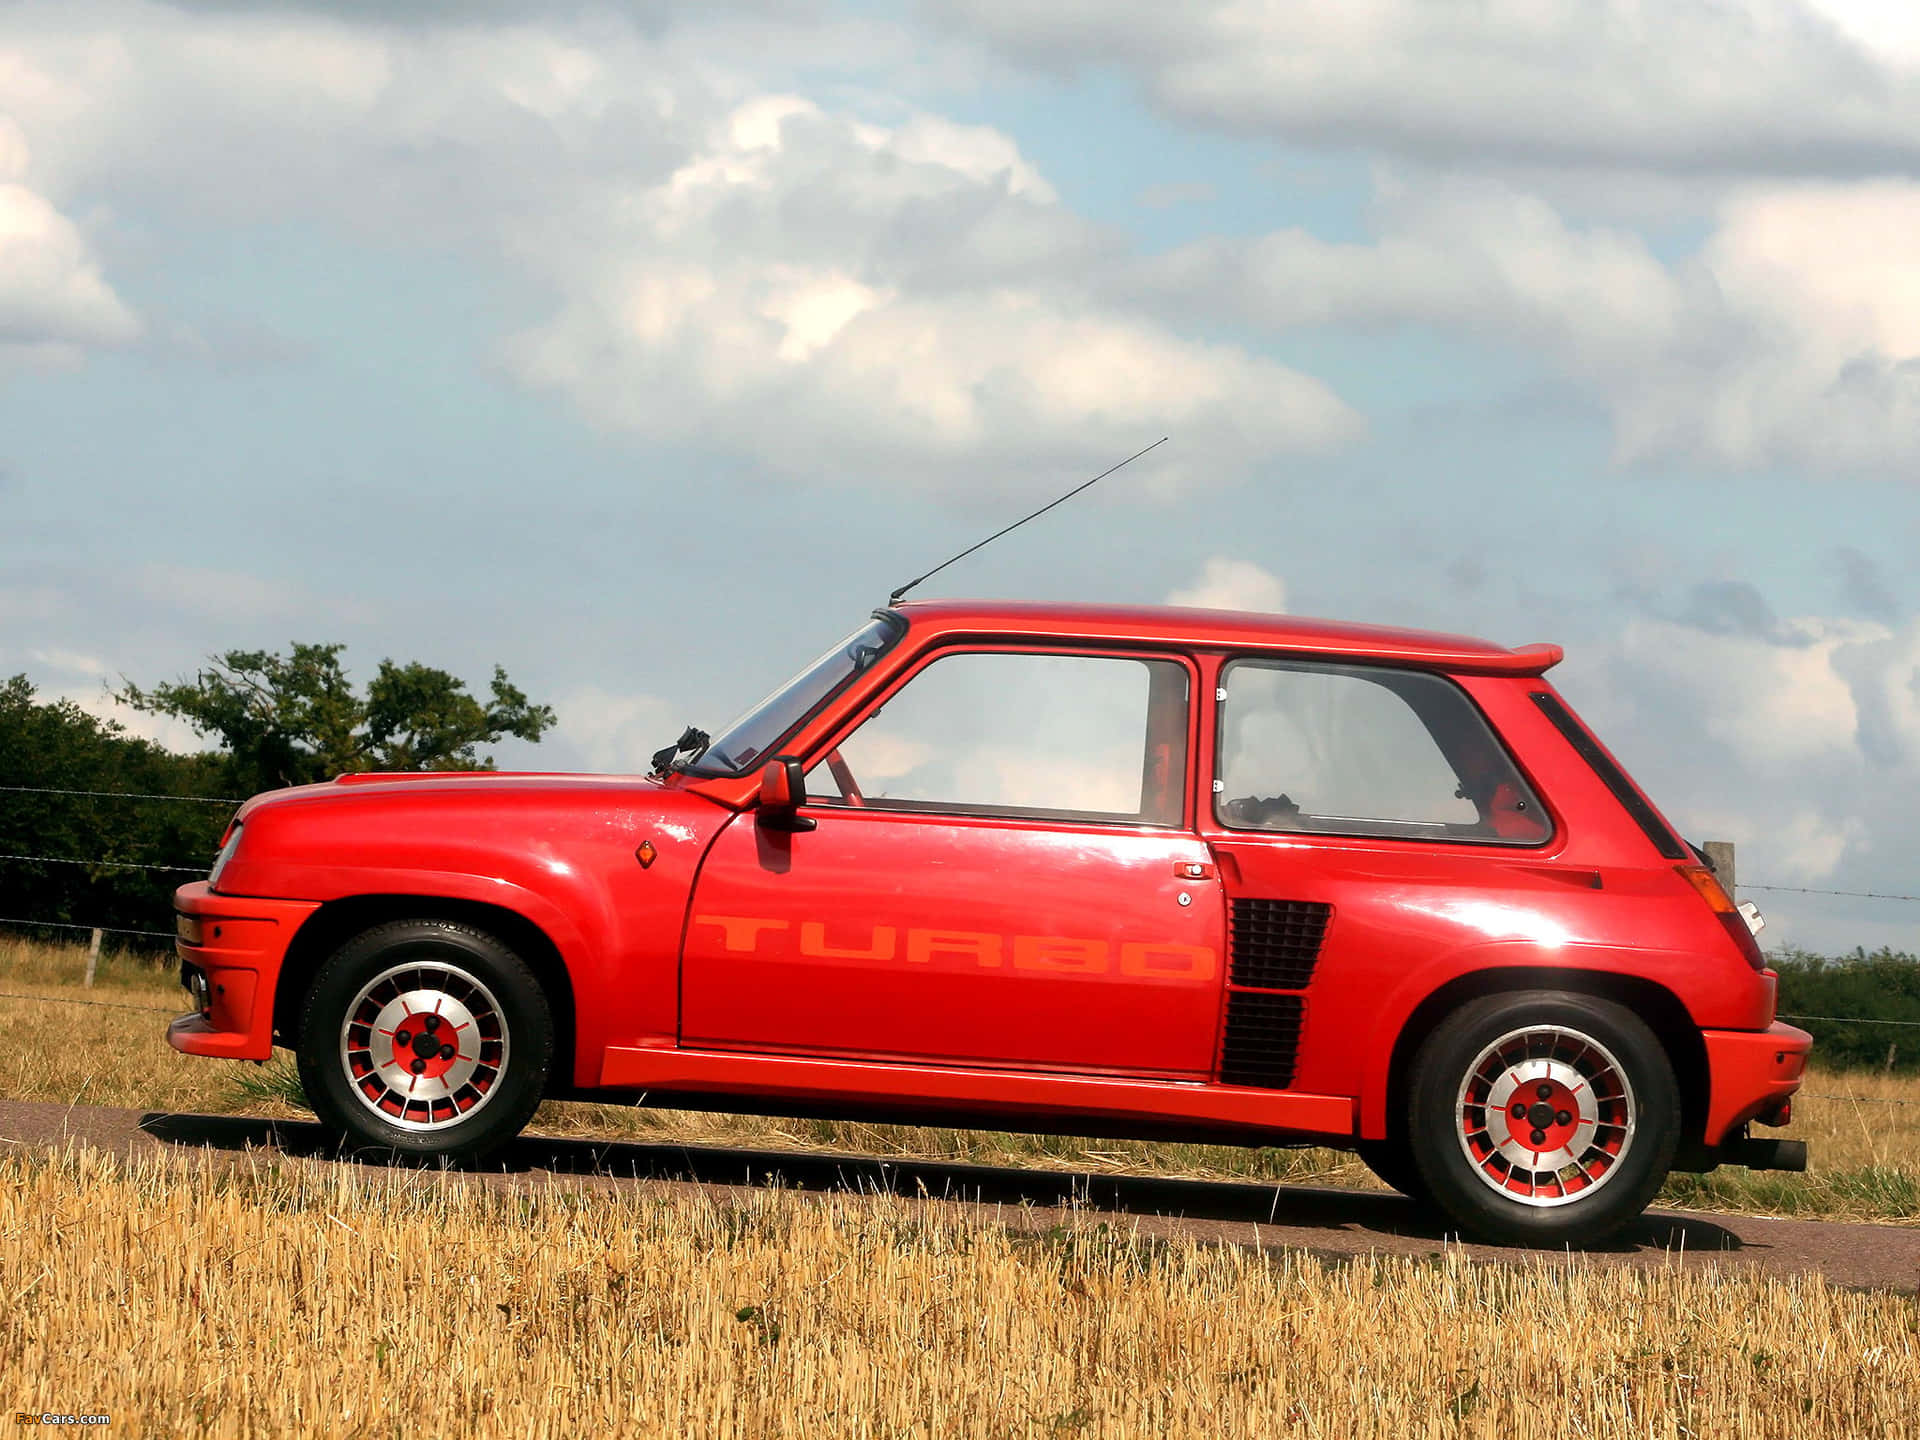 Iconic Renault 5 Turbo in action Wallpaper